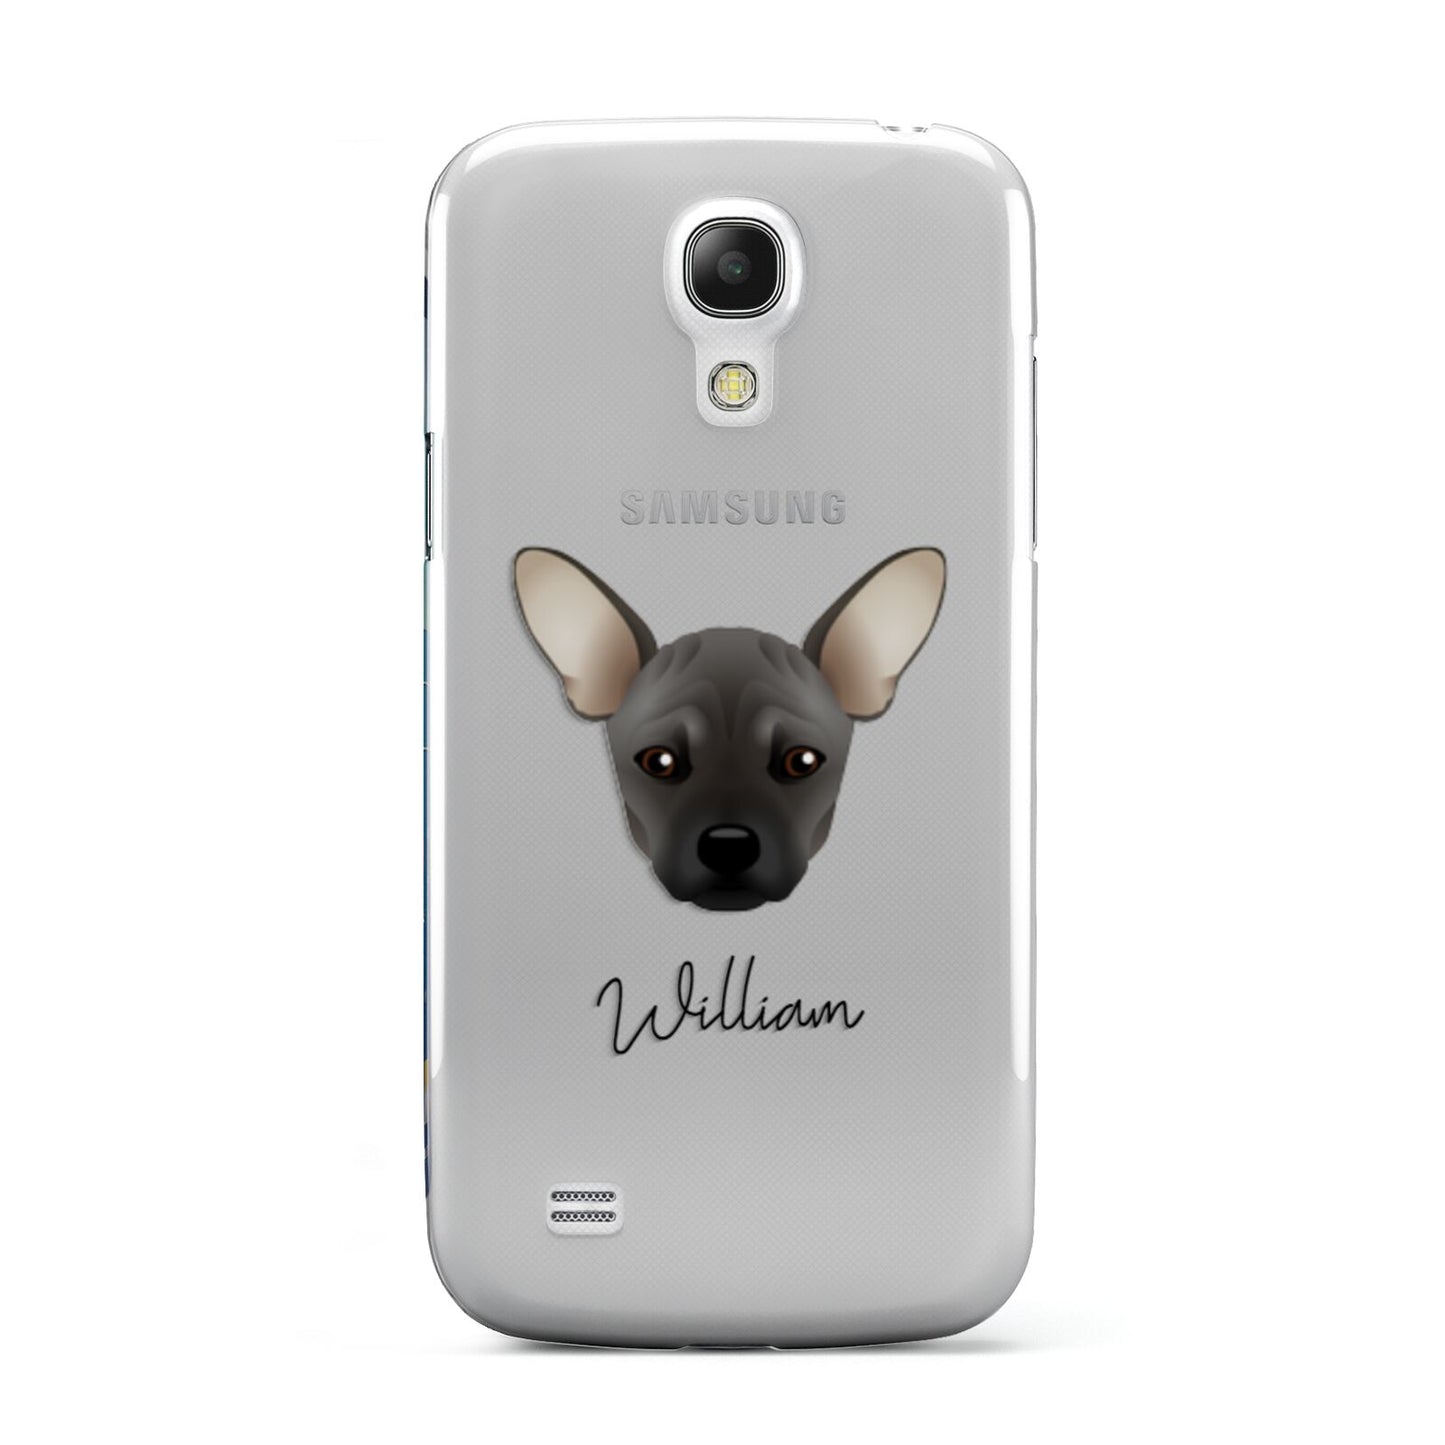 French Pin Personalised Samsung Galaxy S4 Mini Case